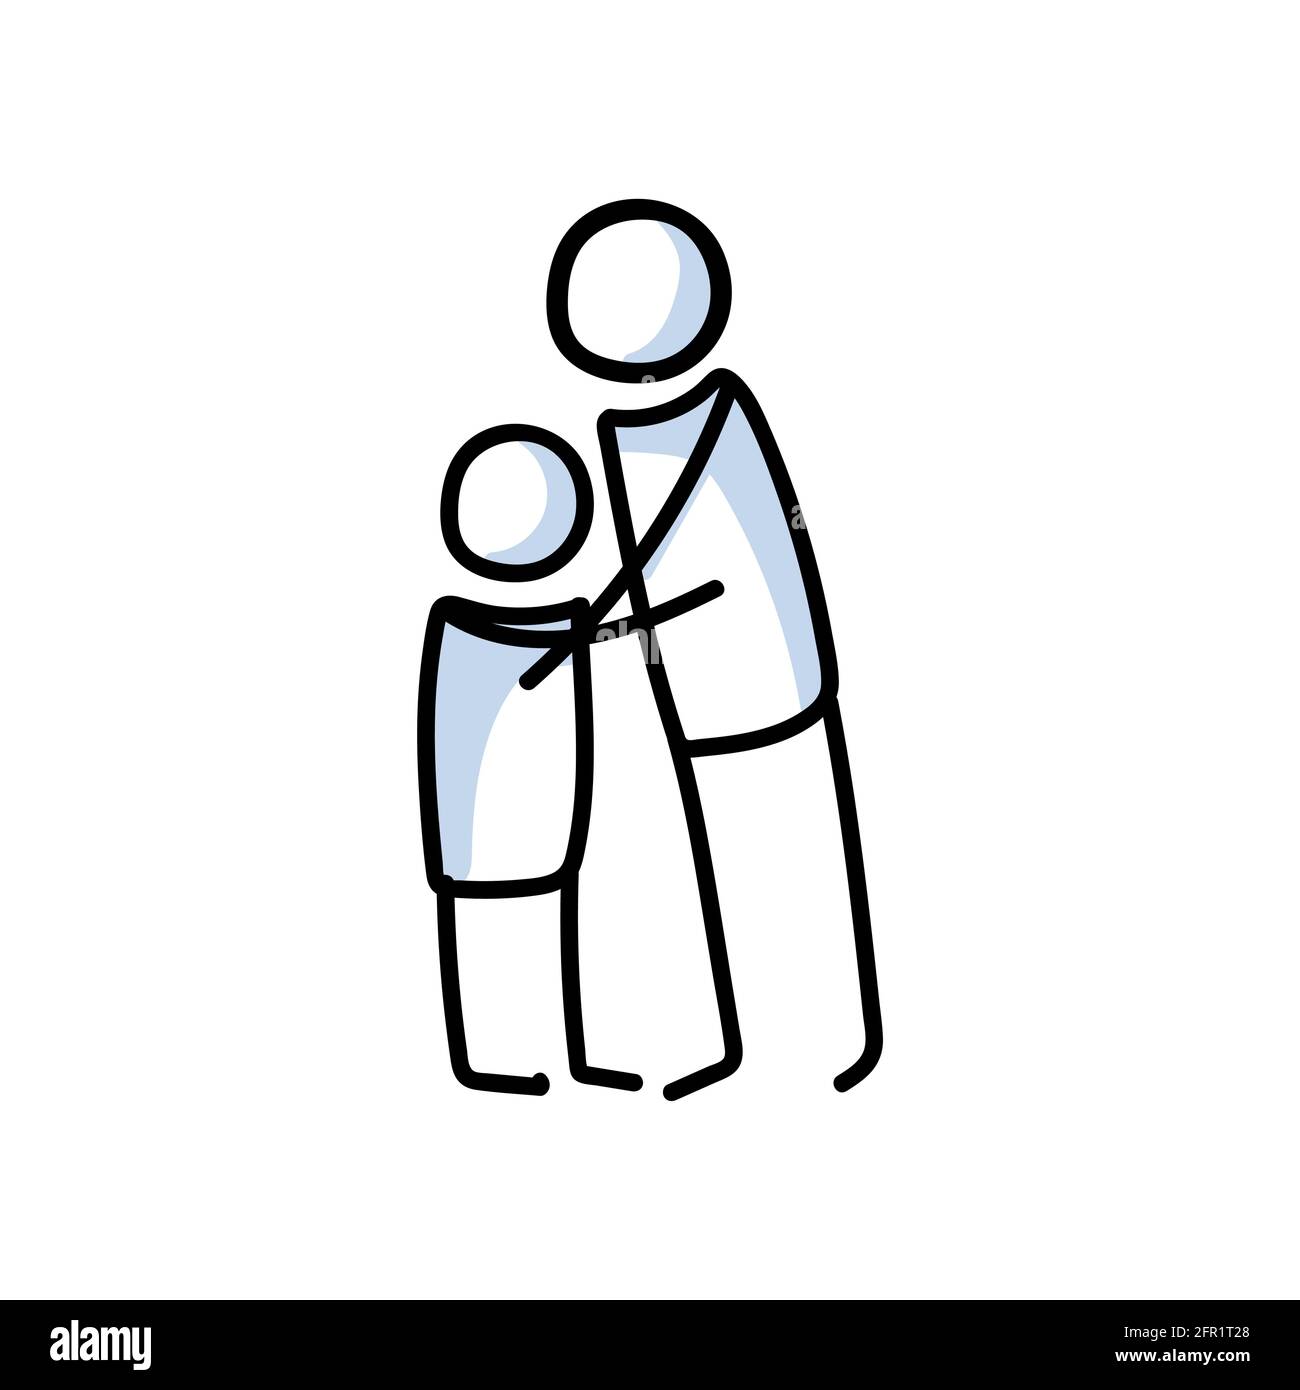 Drawn stick figure of 2 friends hugging. Support of young people embrace  together illustrated vector sketchnote Stock Vector Image & Art - Alamy